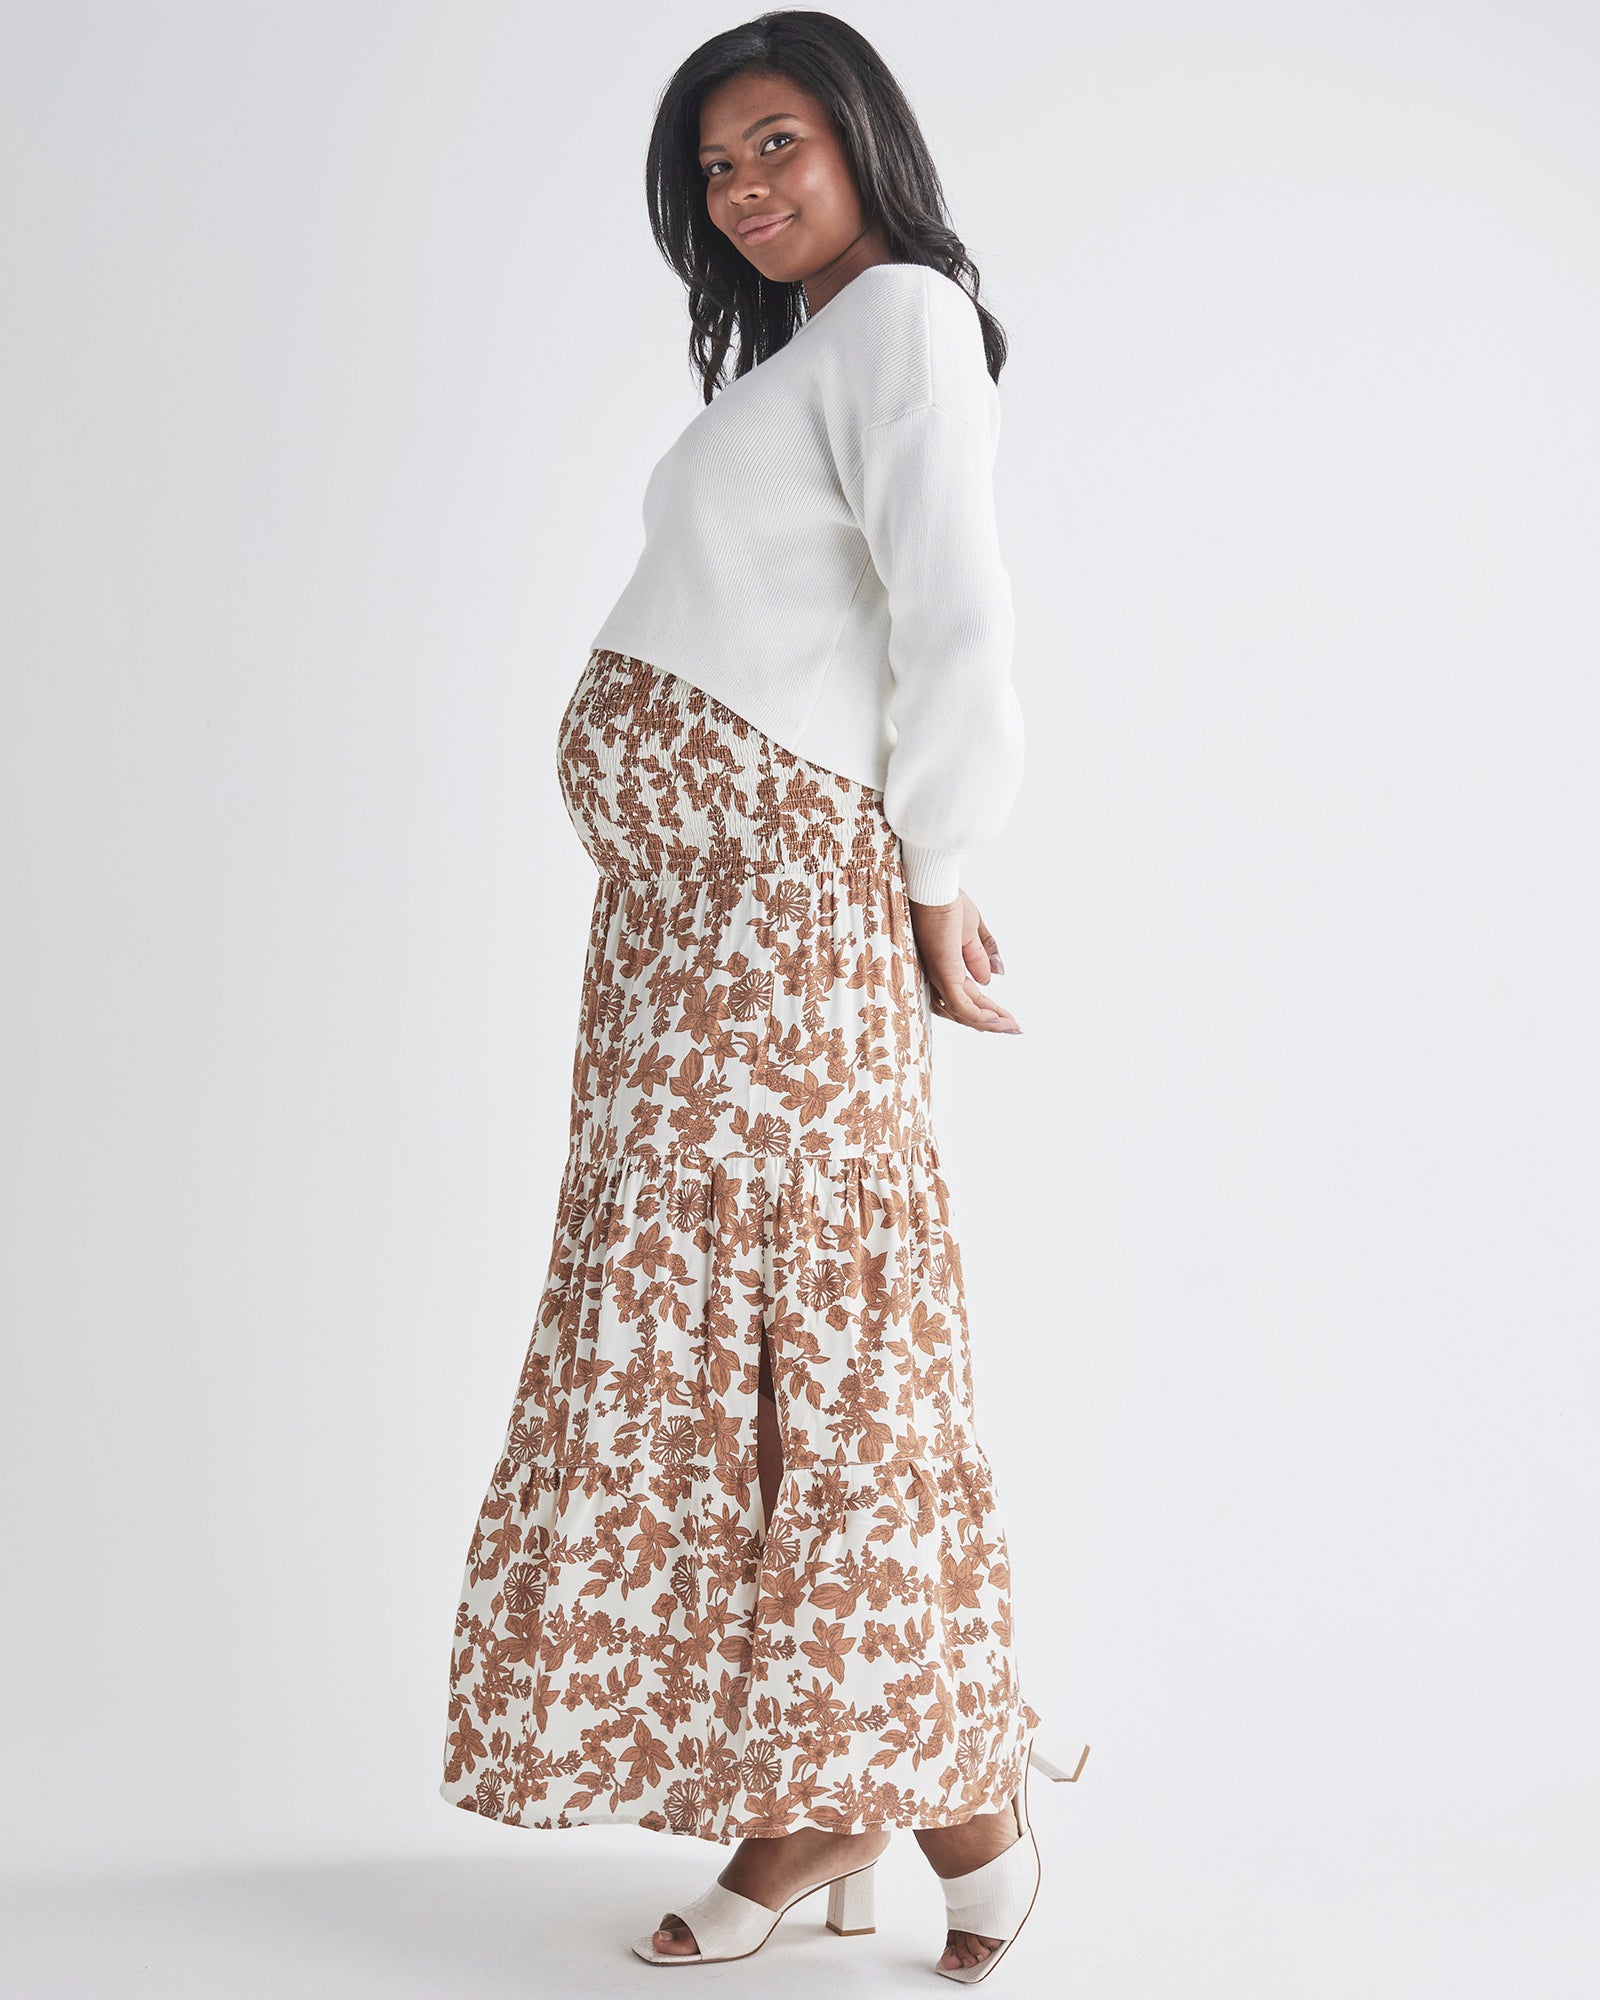 Side view-Long skirt &amp; Strapless dress&nbsp; Shirred elastic waist band Casual, work or day-to-night wear Colour: Brown Floral Print from AngelMaternity